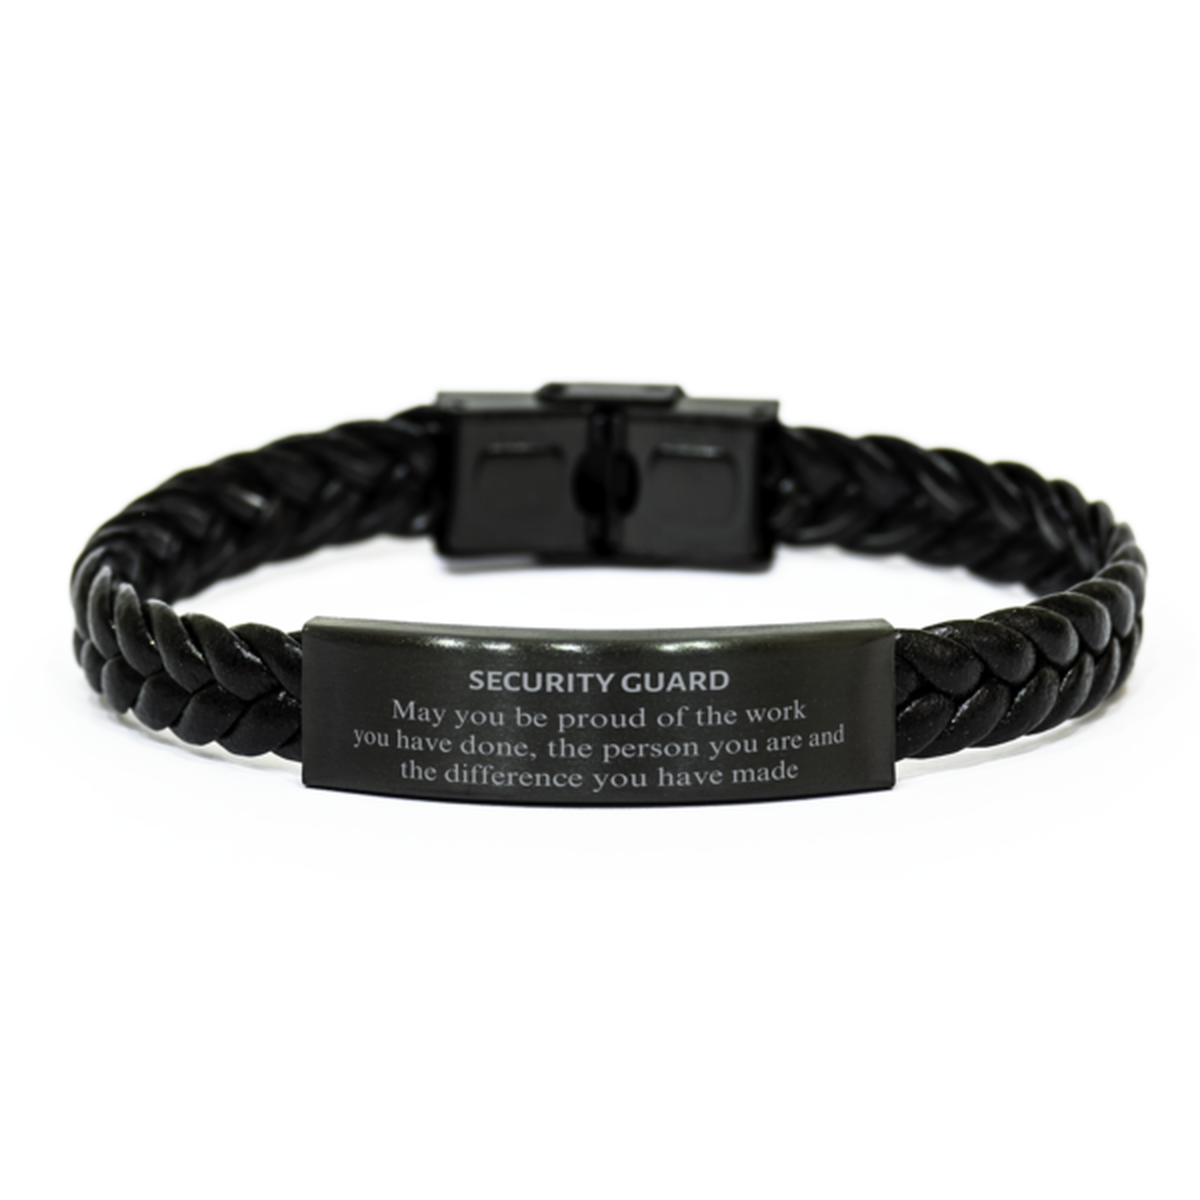 Security Guard May you be proud of the work you have done, Retirement Security Guard Braided Leather Bracelet for Colleague Appreciation Gifts Amazing for Security Guard